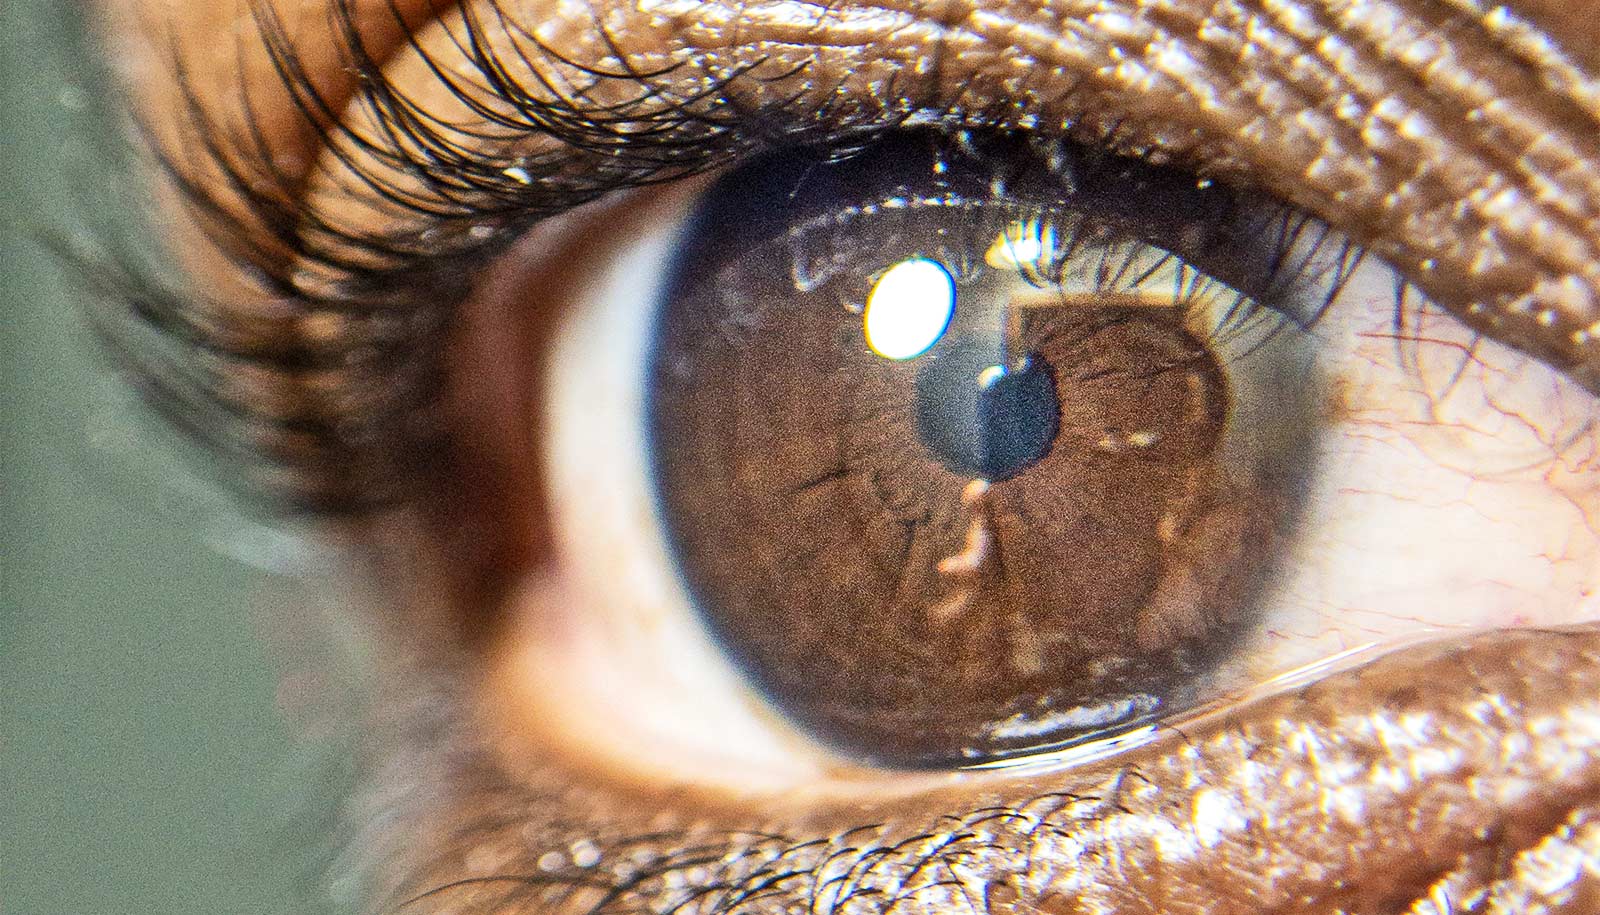 Target could lead to more effective glaucoma treatment - Futurity